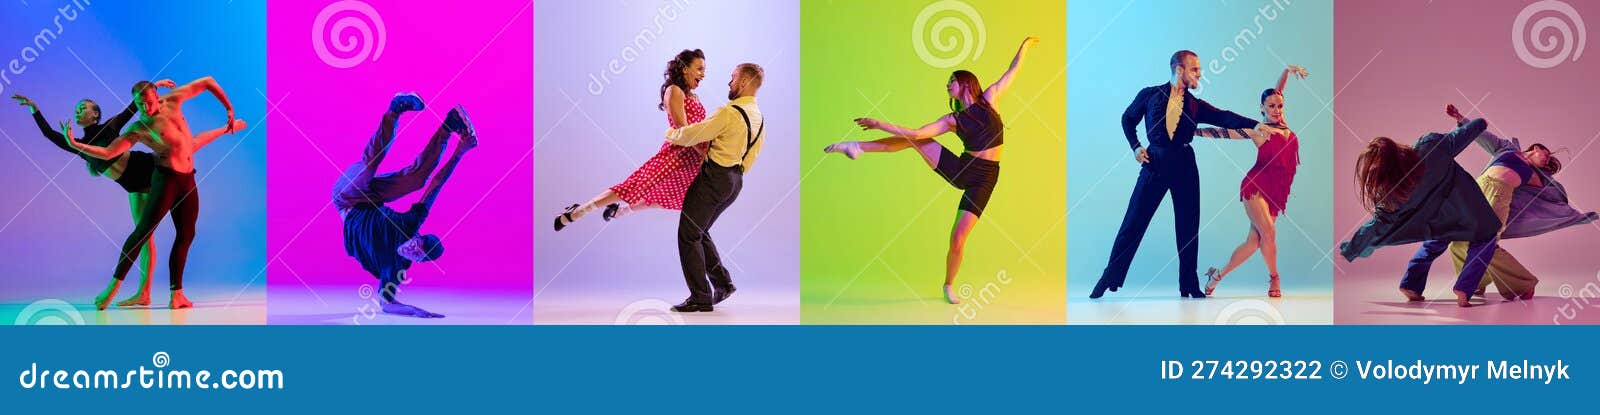 Mix of Retro and Modern Dance Styles. Set of Images of Young People Dancing Against Multicolored in Neon Stock Photo - Image of jill, dance: 274292322